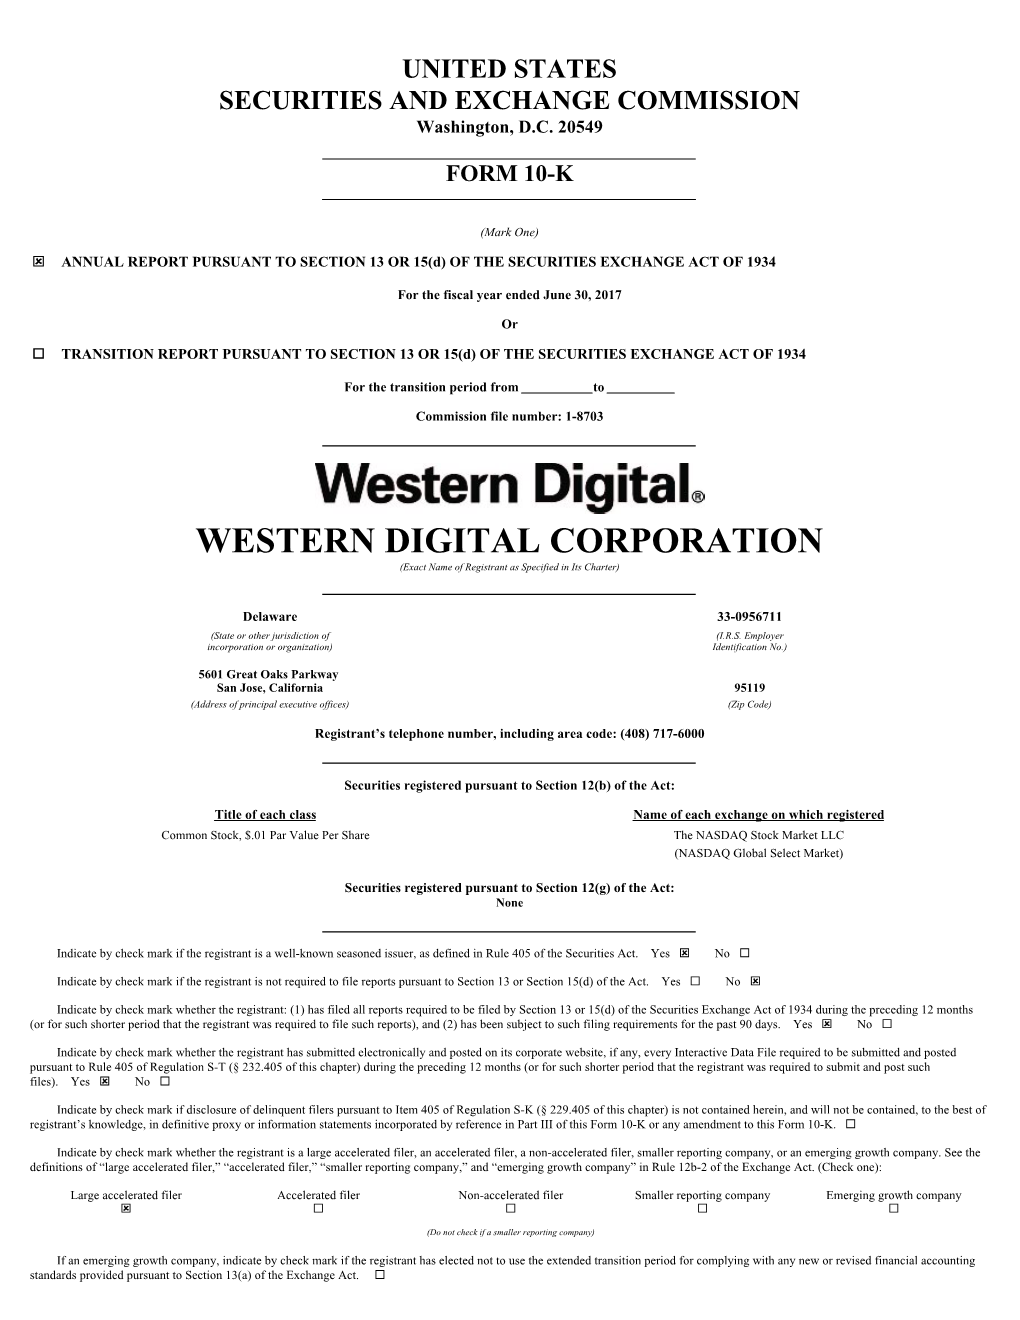 WESTERN DIGITAL CORPORATION (Exact Name of Registrant As Specified in Its Charter)